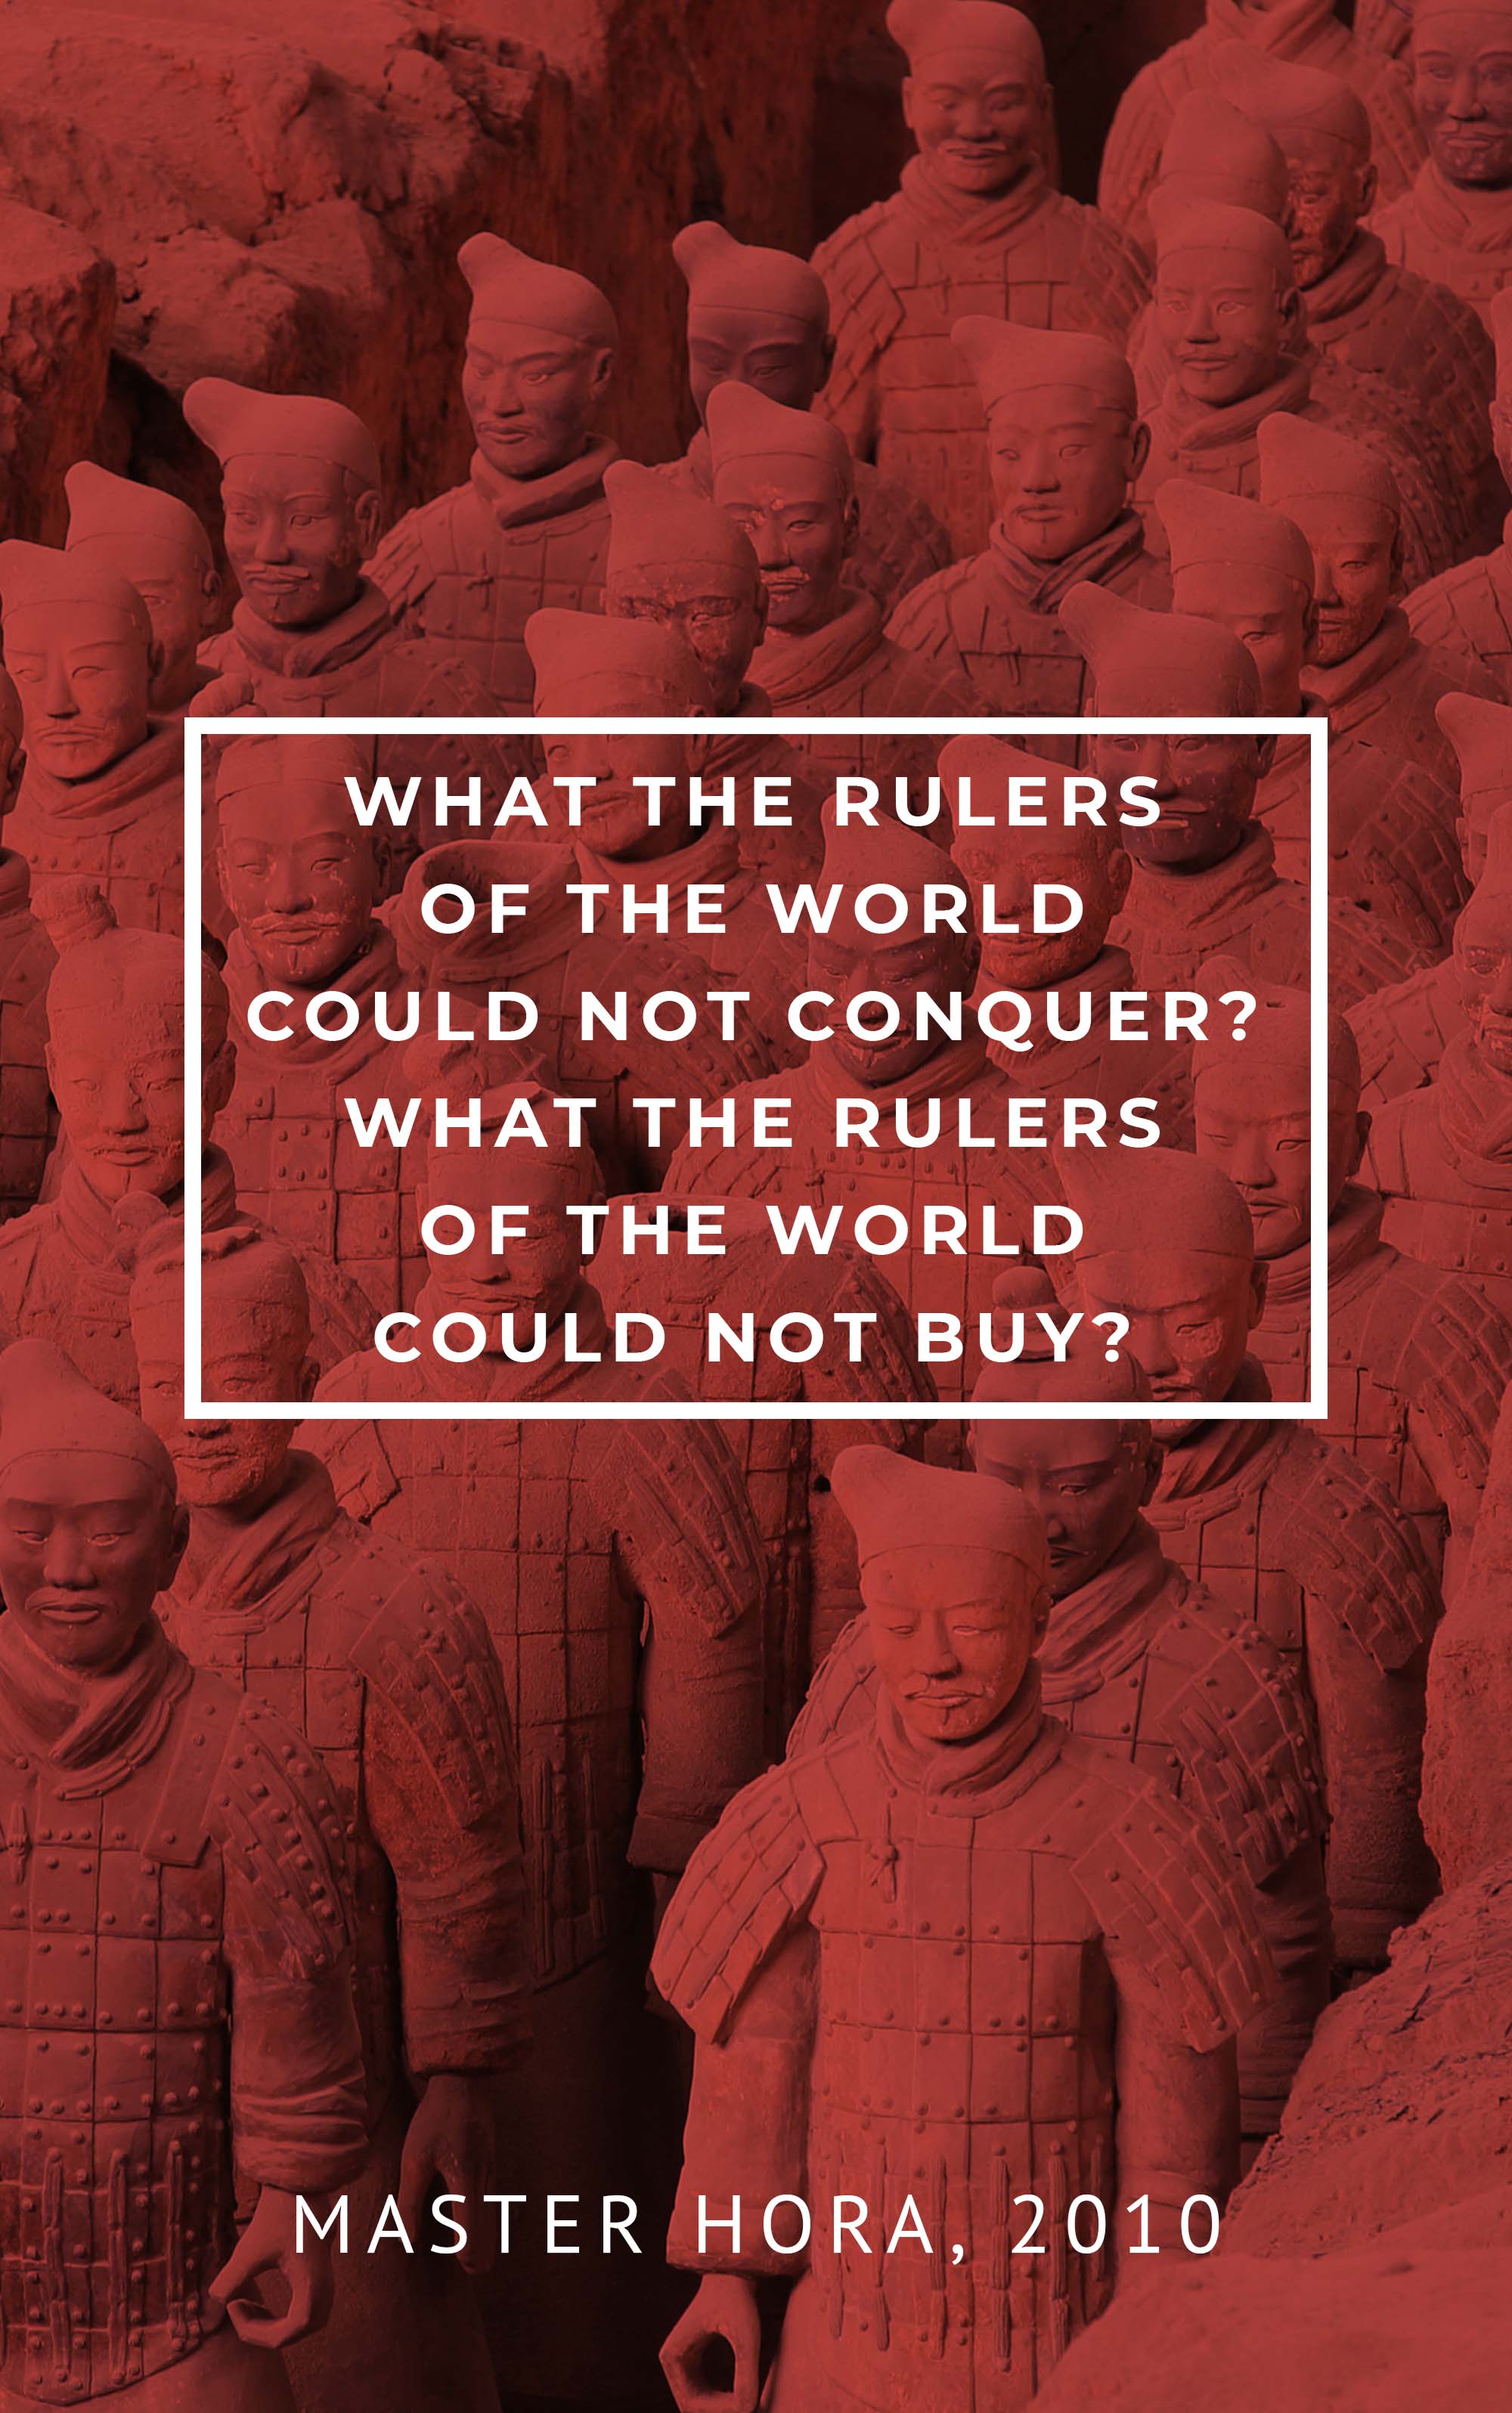 What The Rulers Of The World Could Not Conquer?